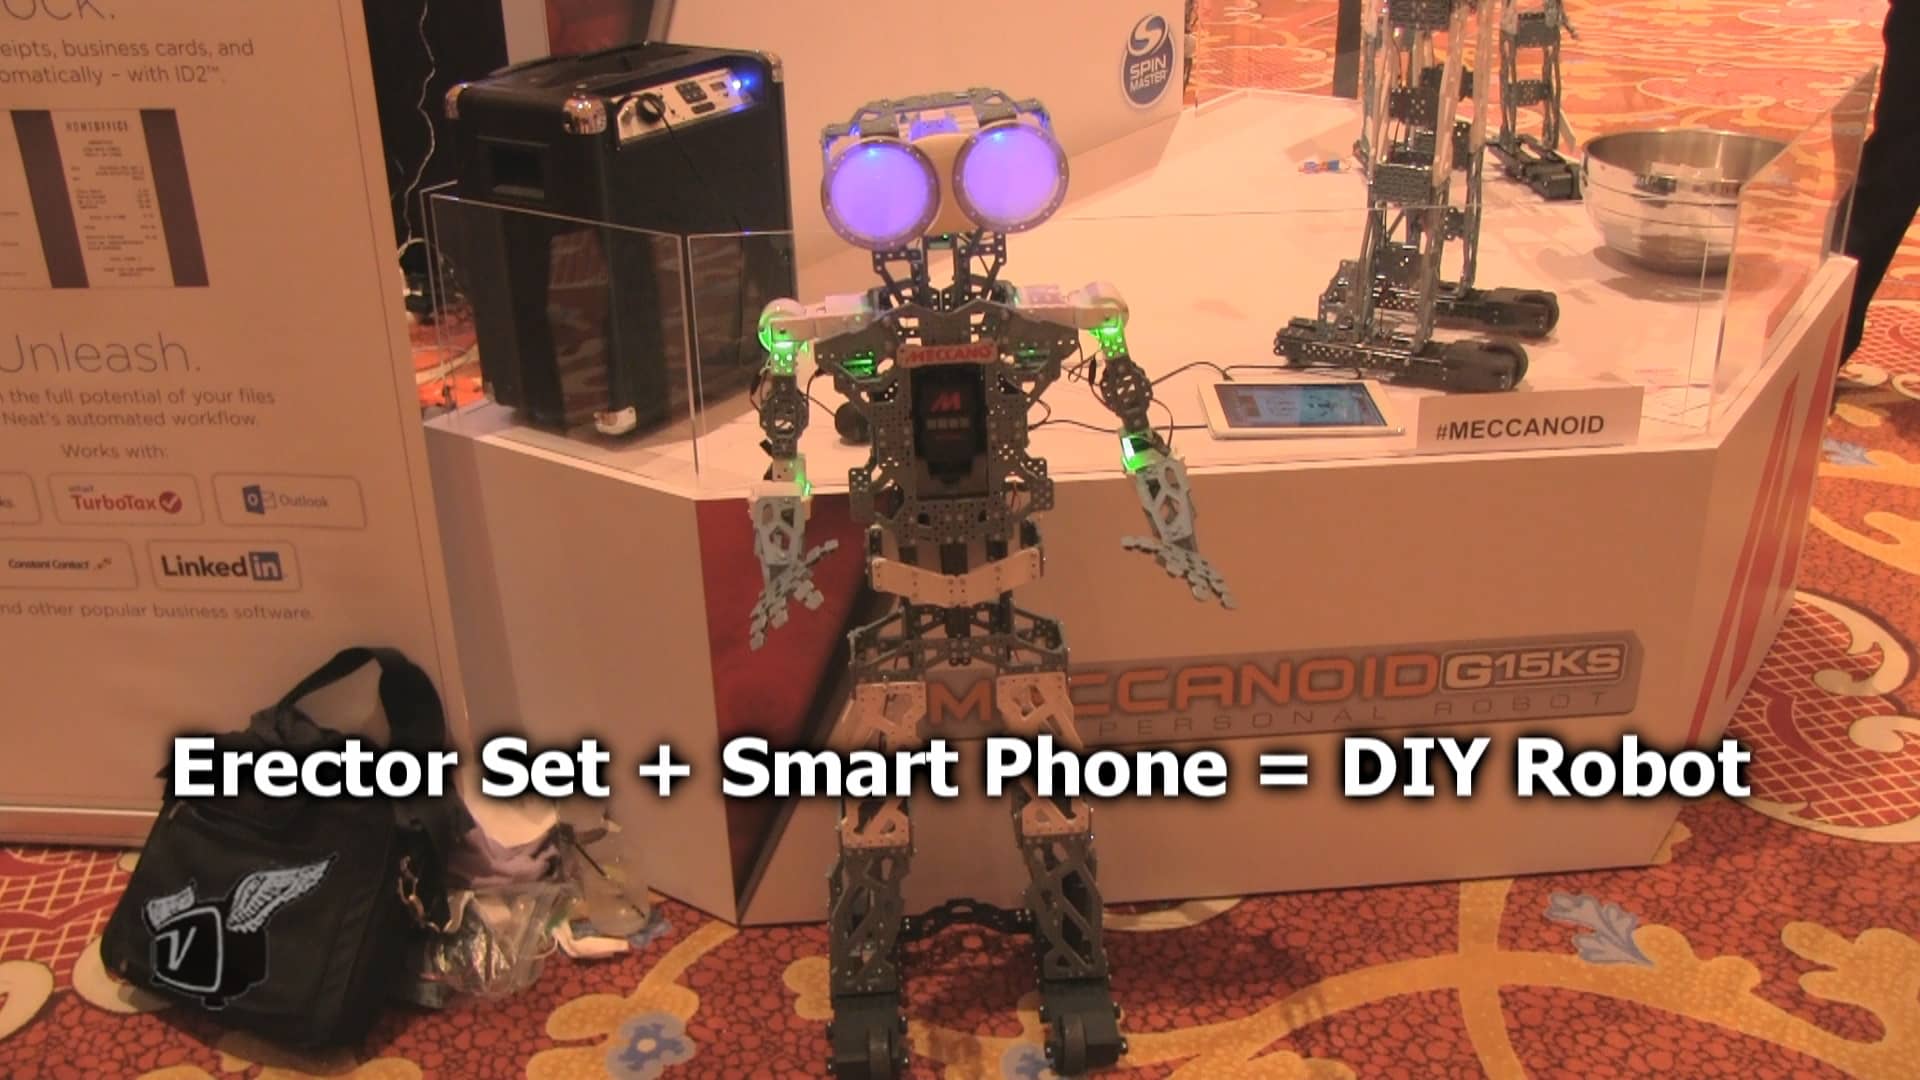 A do-it-yourself robot that combines an old fashion toy with a modern smartphone.